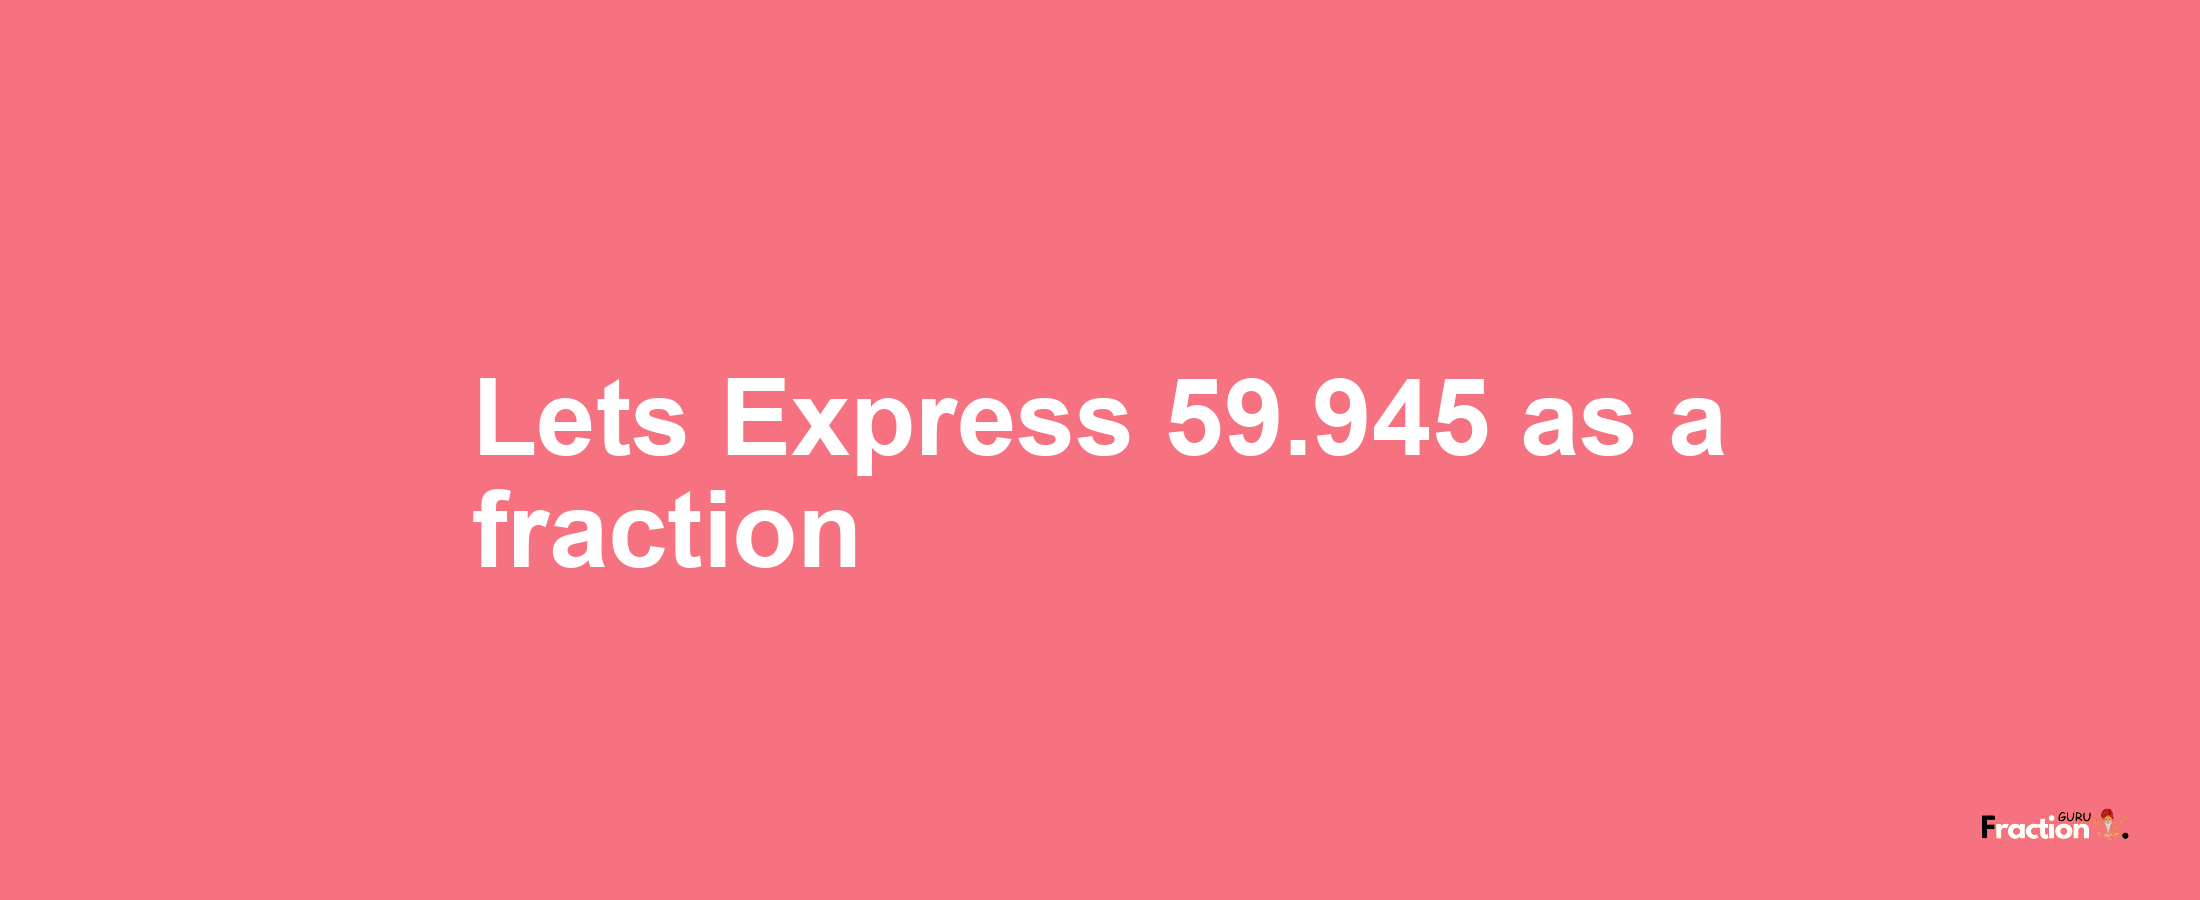 Lets Express 59.945 as afraction